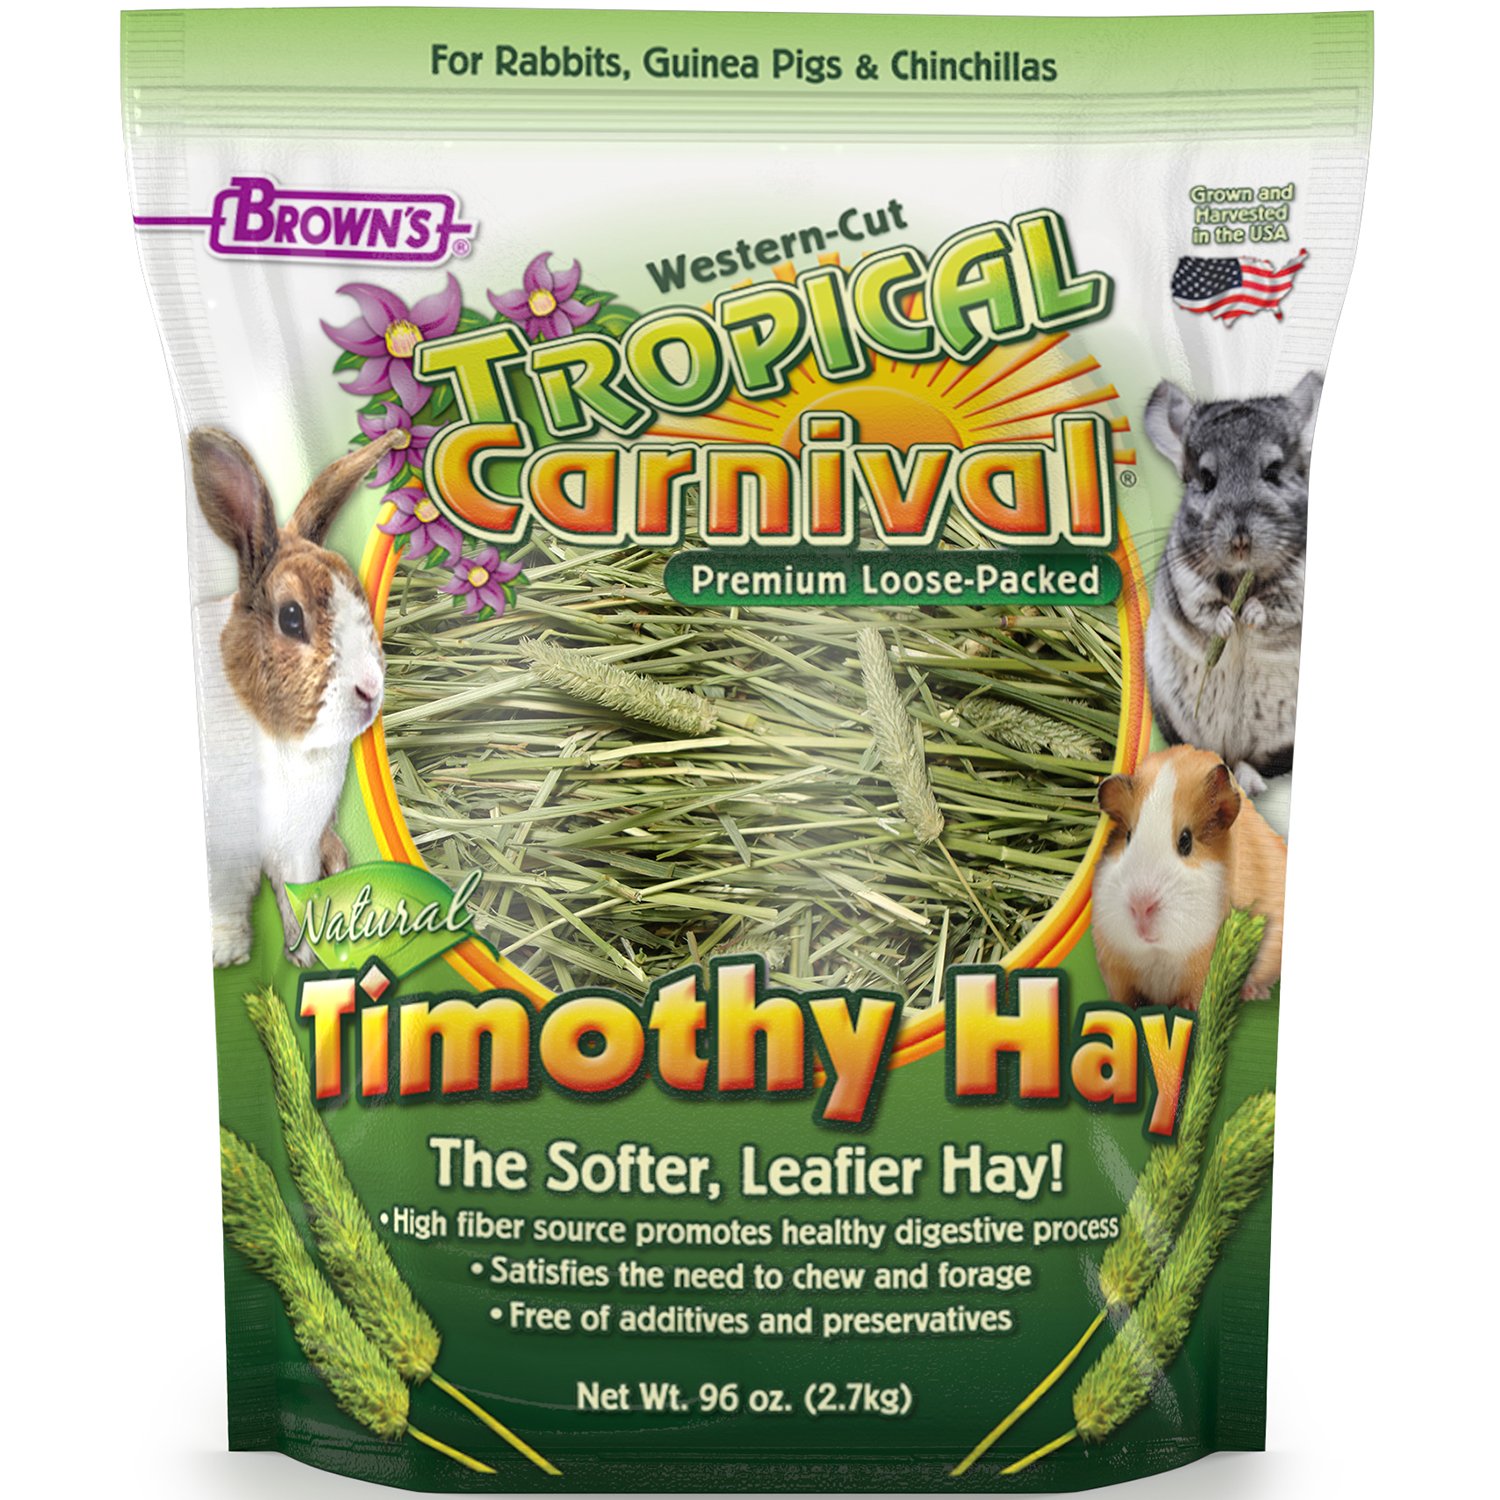 F.M. Brown's Tropical Carnival Natural Timothy Hay for Guinea Pigs, Rabbits, and Other Small Animals, with High Fiber for Healthy Digestion - 9...